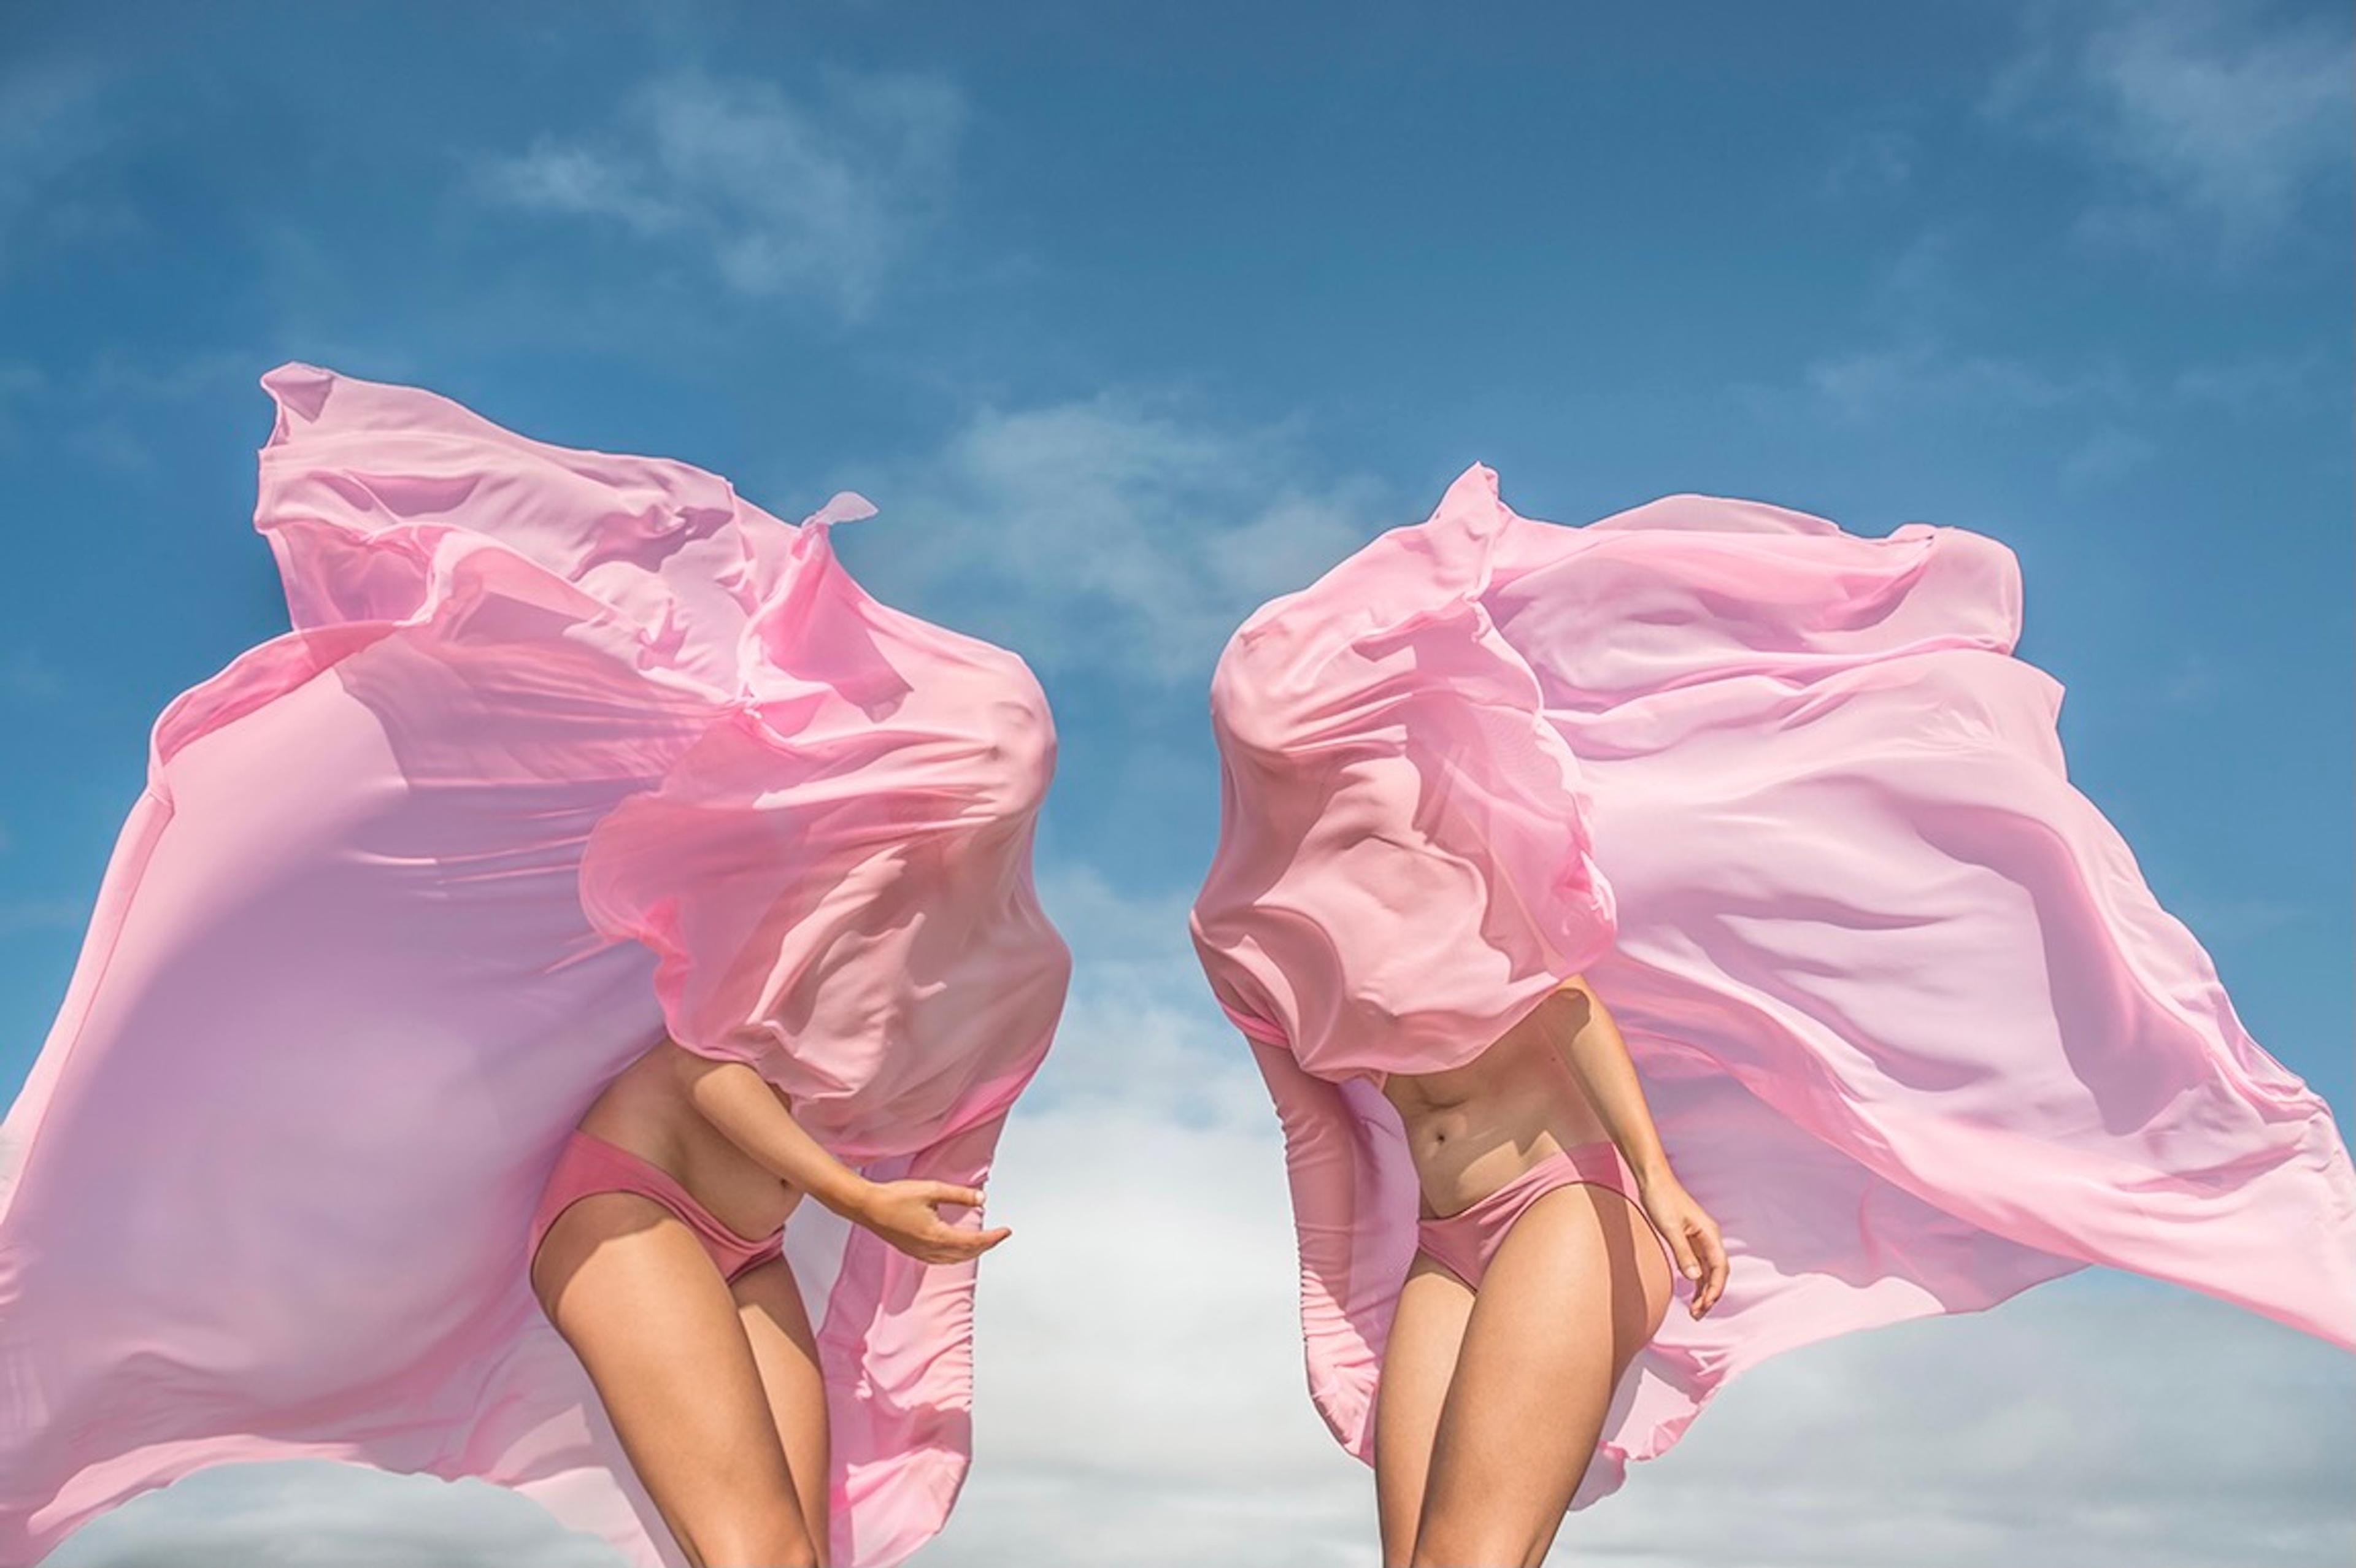 A symmetrical photograph of two women covered in pink sheets from the waist up